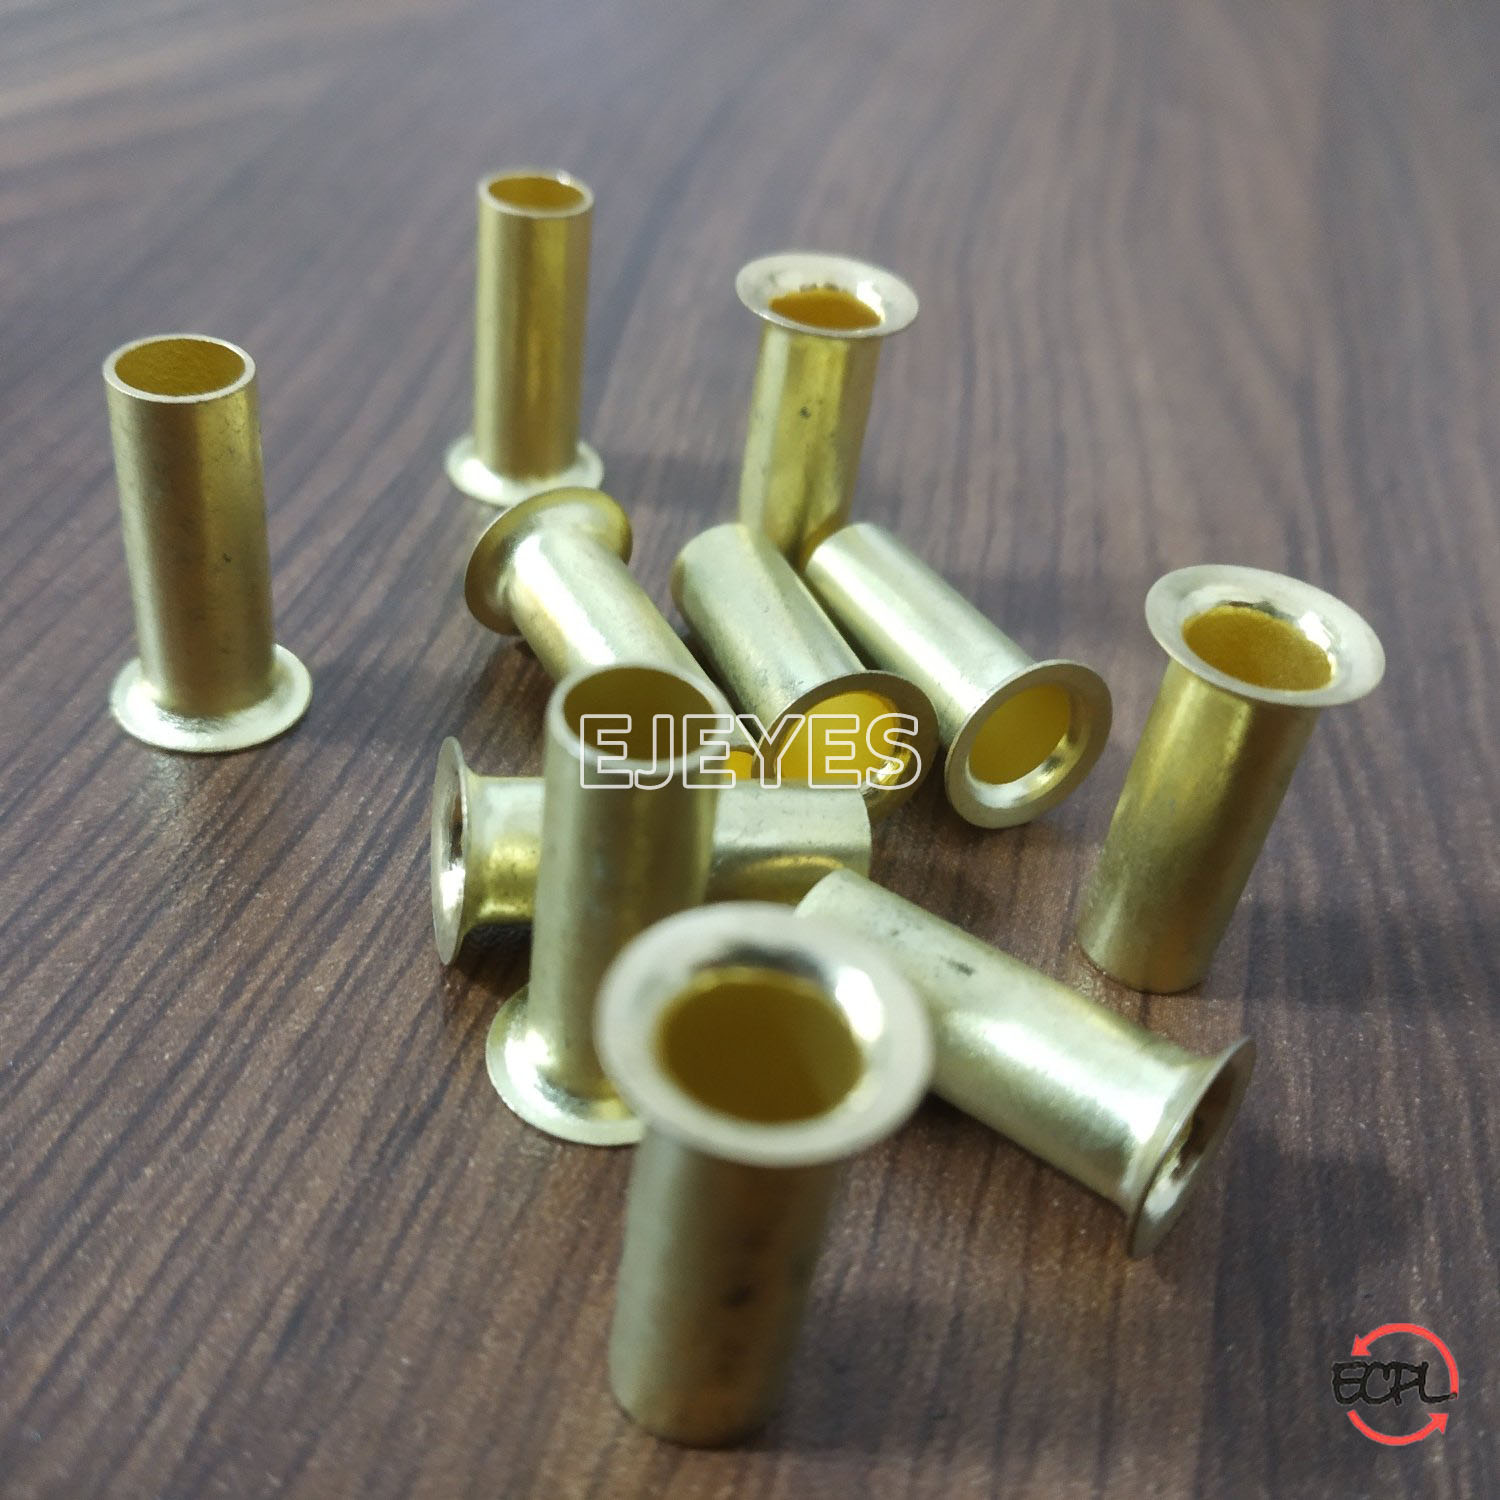 Brass tubular rivet: A dependable and versatile hardware component, essential for various assembly and repair tasks.